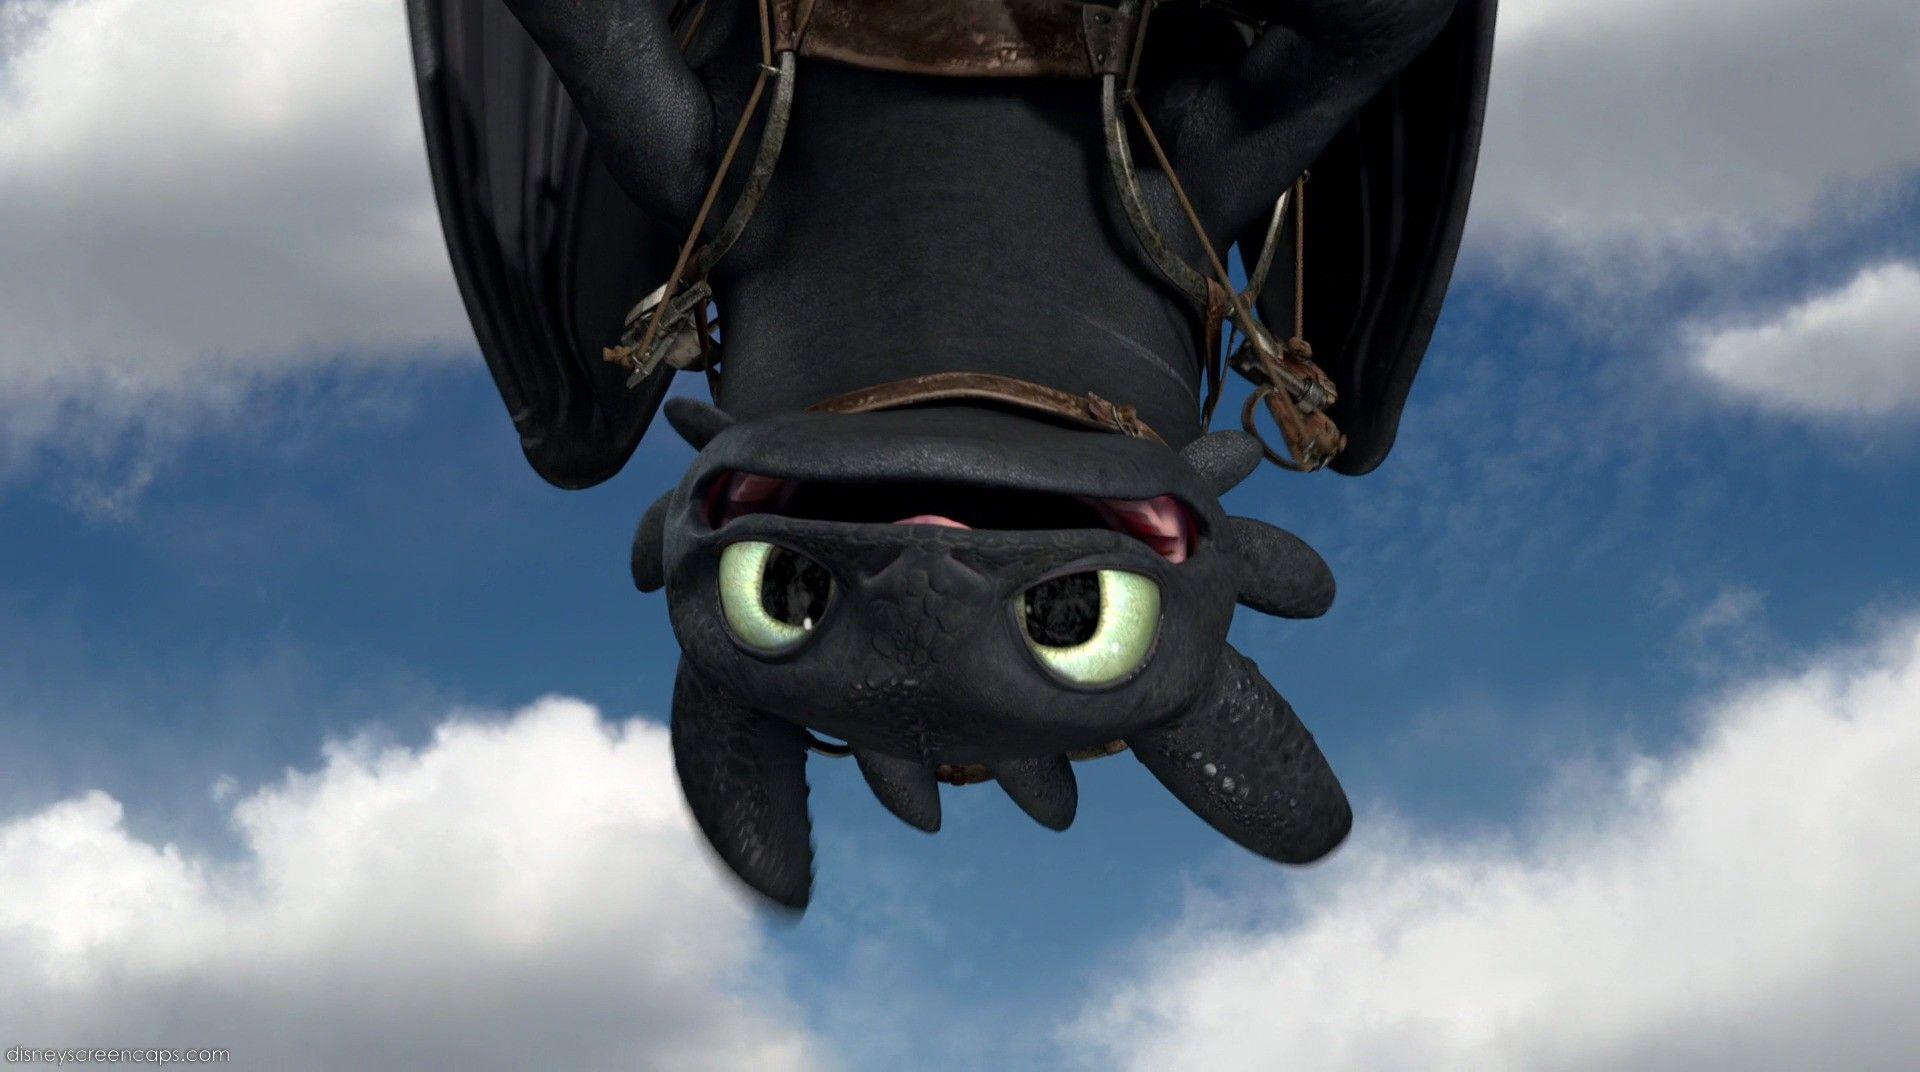 Quality Toothless Wallpaper Widescreen, for PC & Mac, Laptop